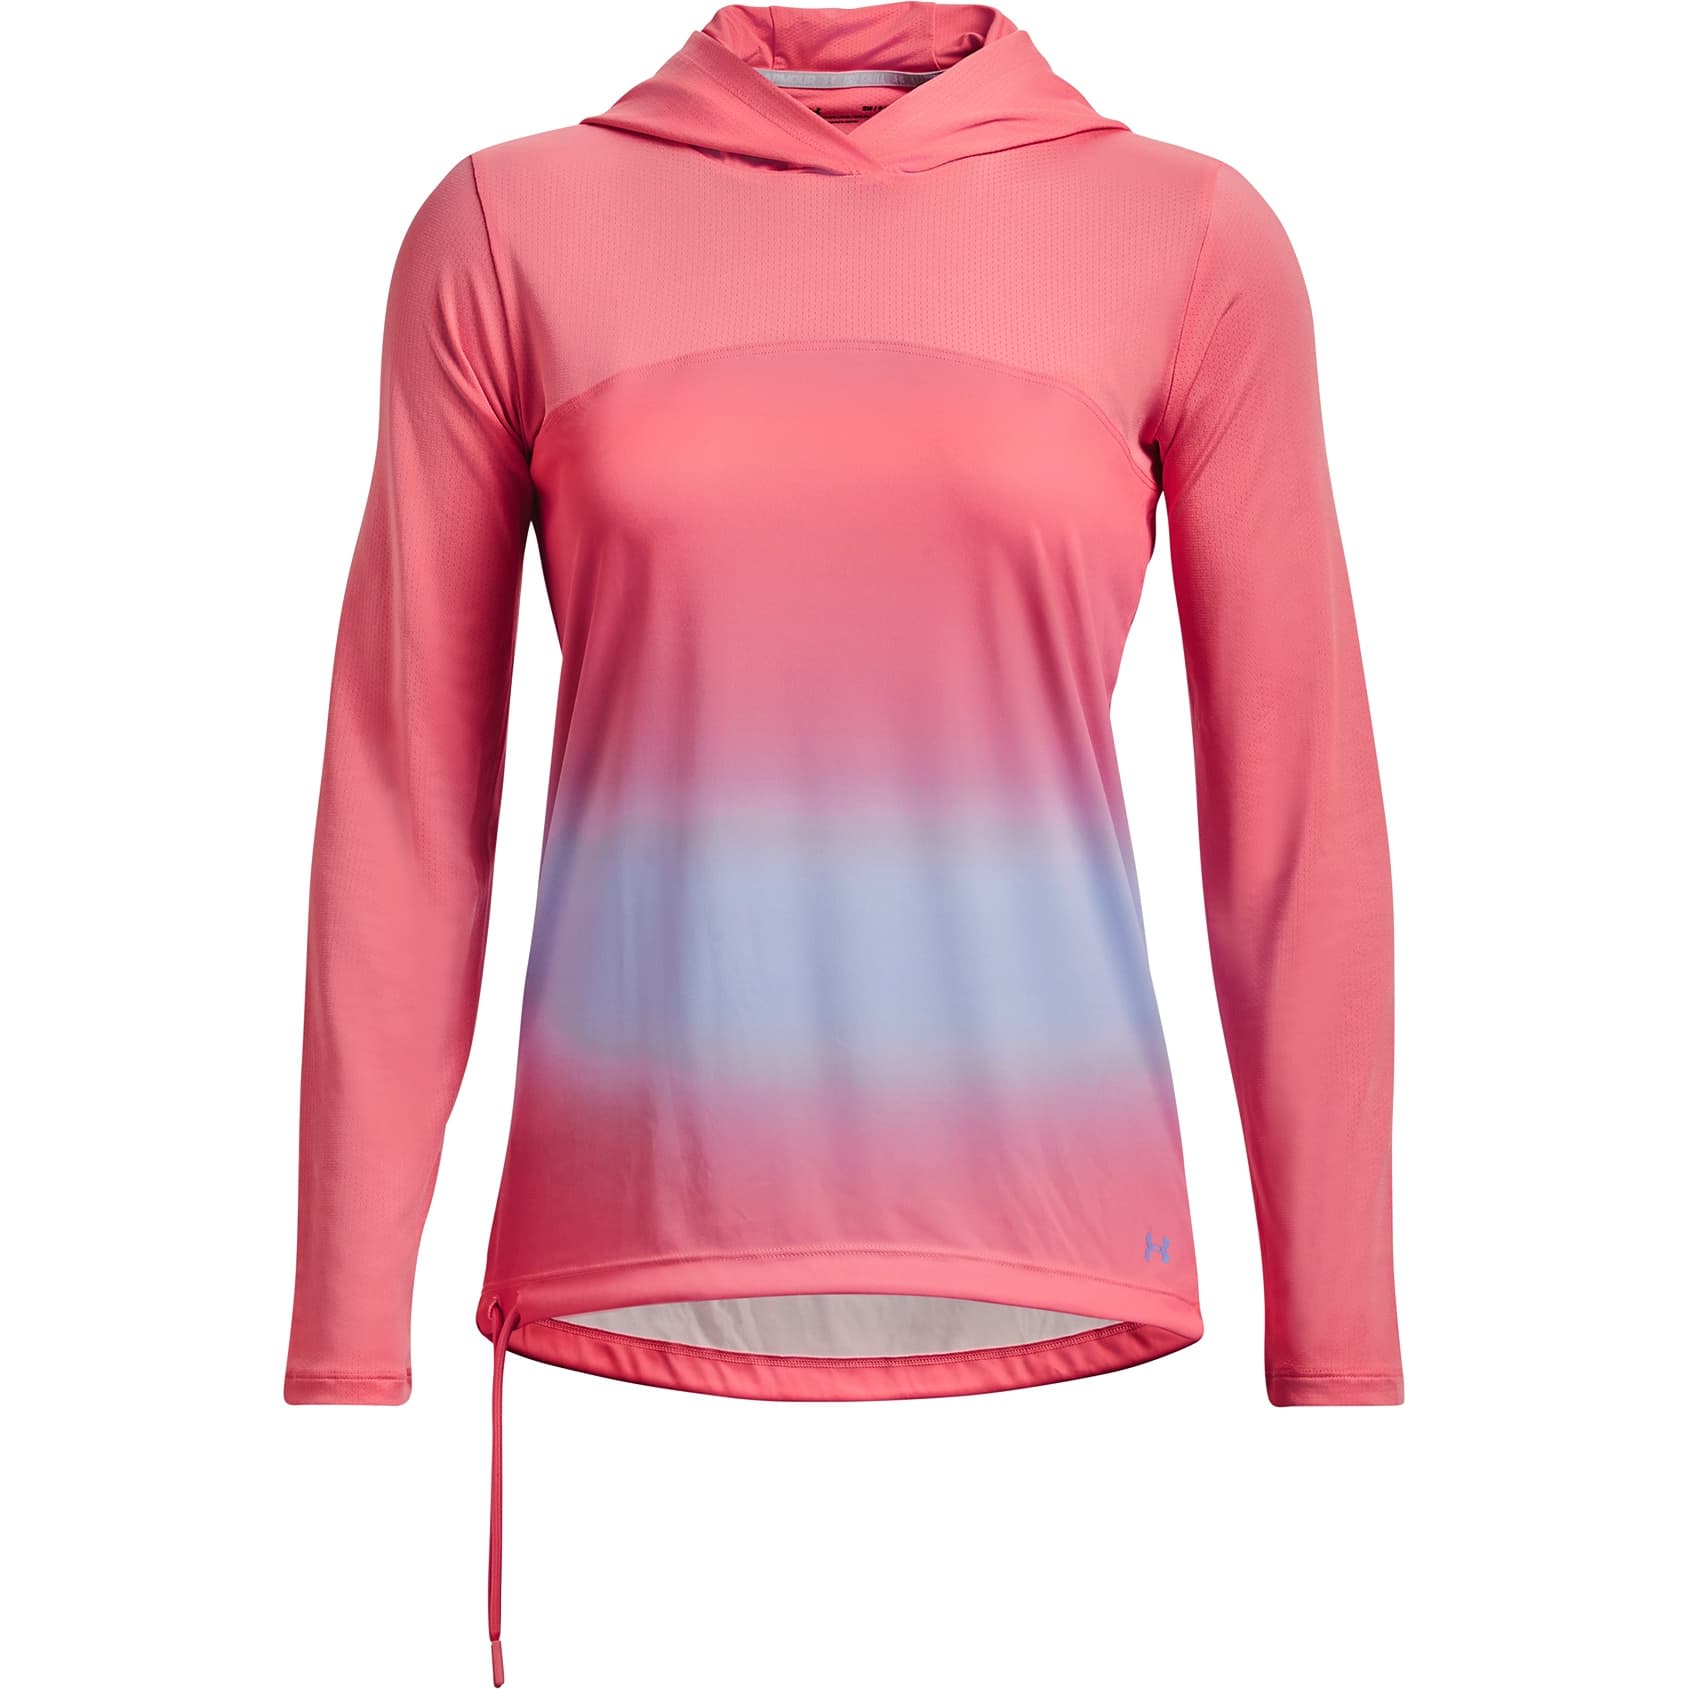 Under Armour® Women's Iso-Chill Long-Sleeve Shirt